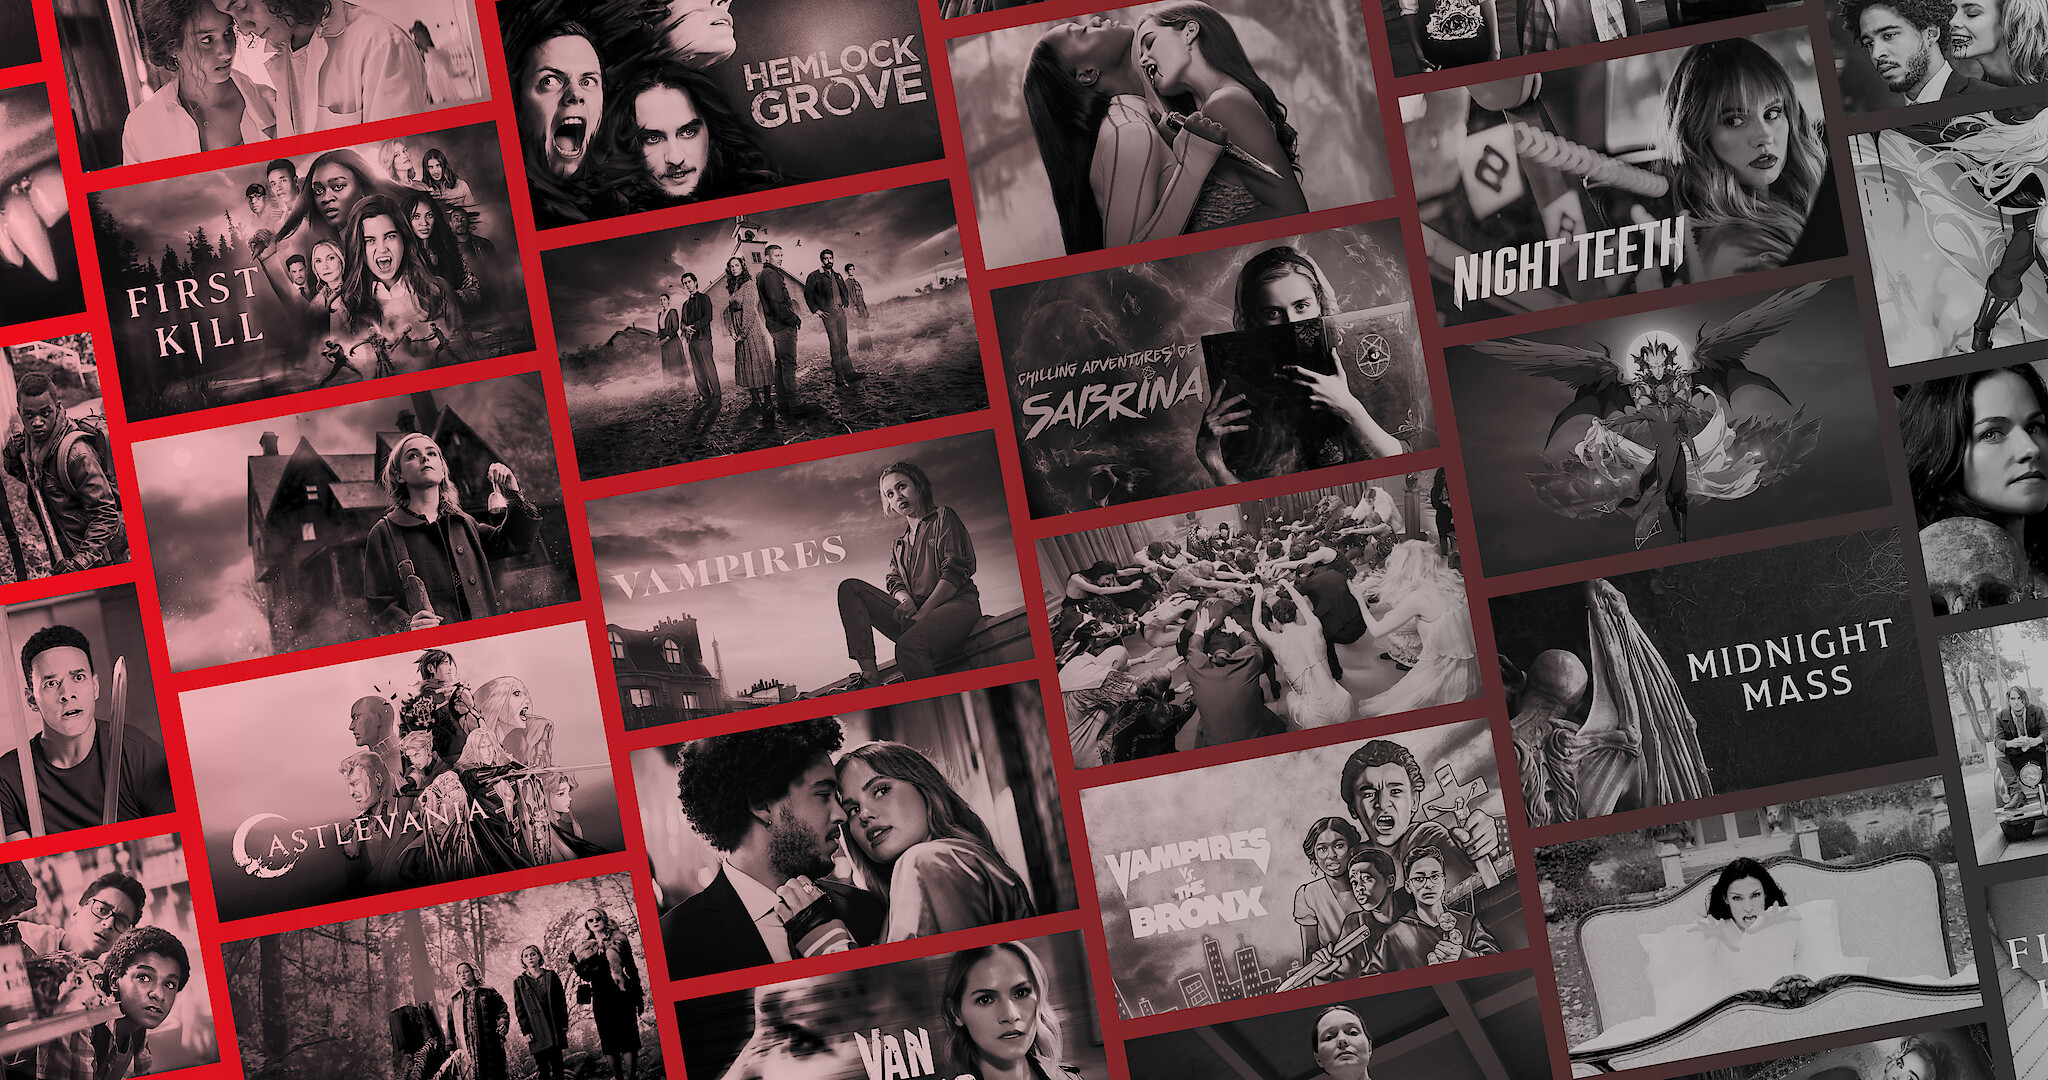 New Scary Movies & Shows to Watch on Netflix in 2022 - Netflix Tudum